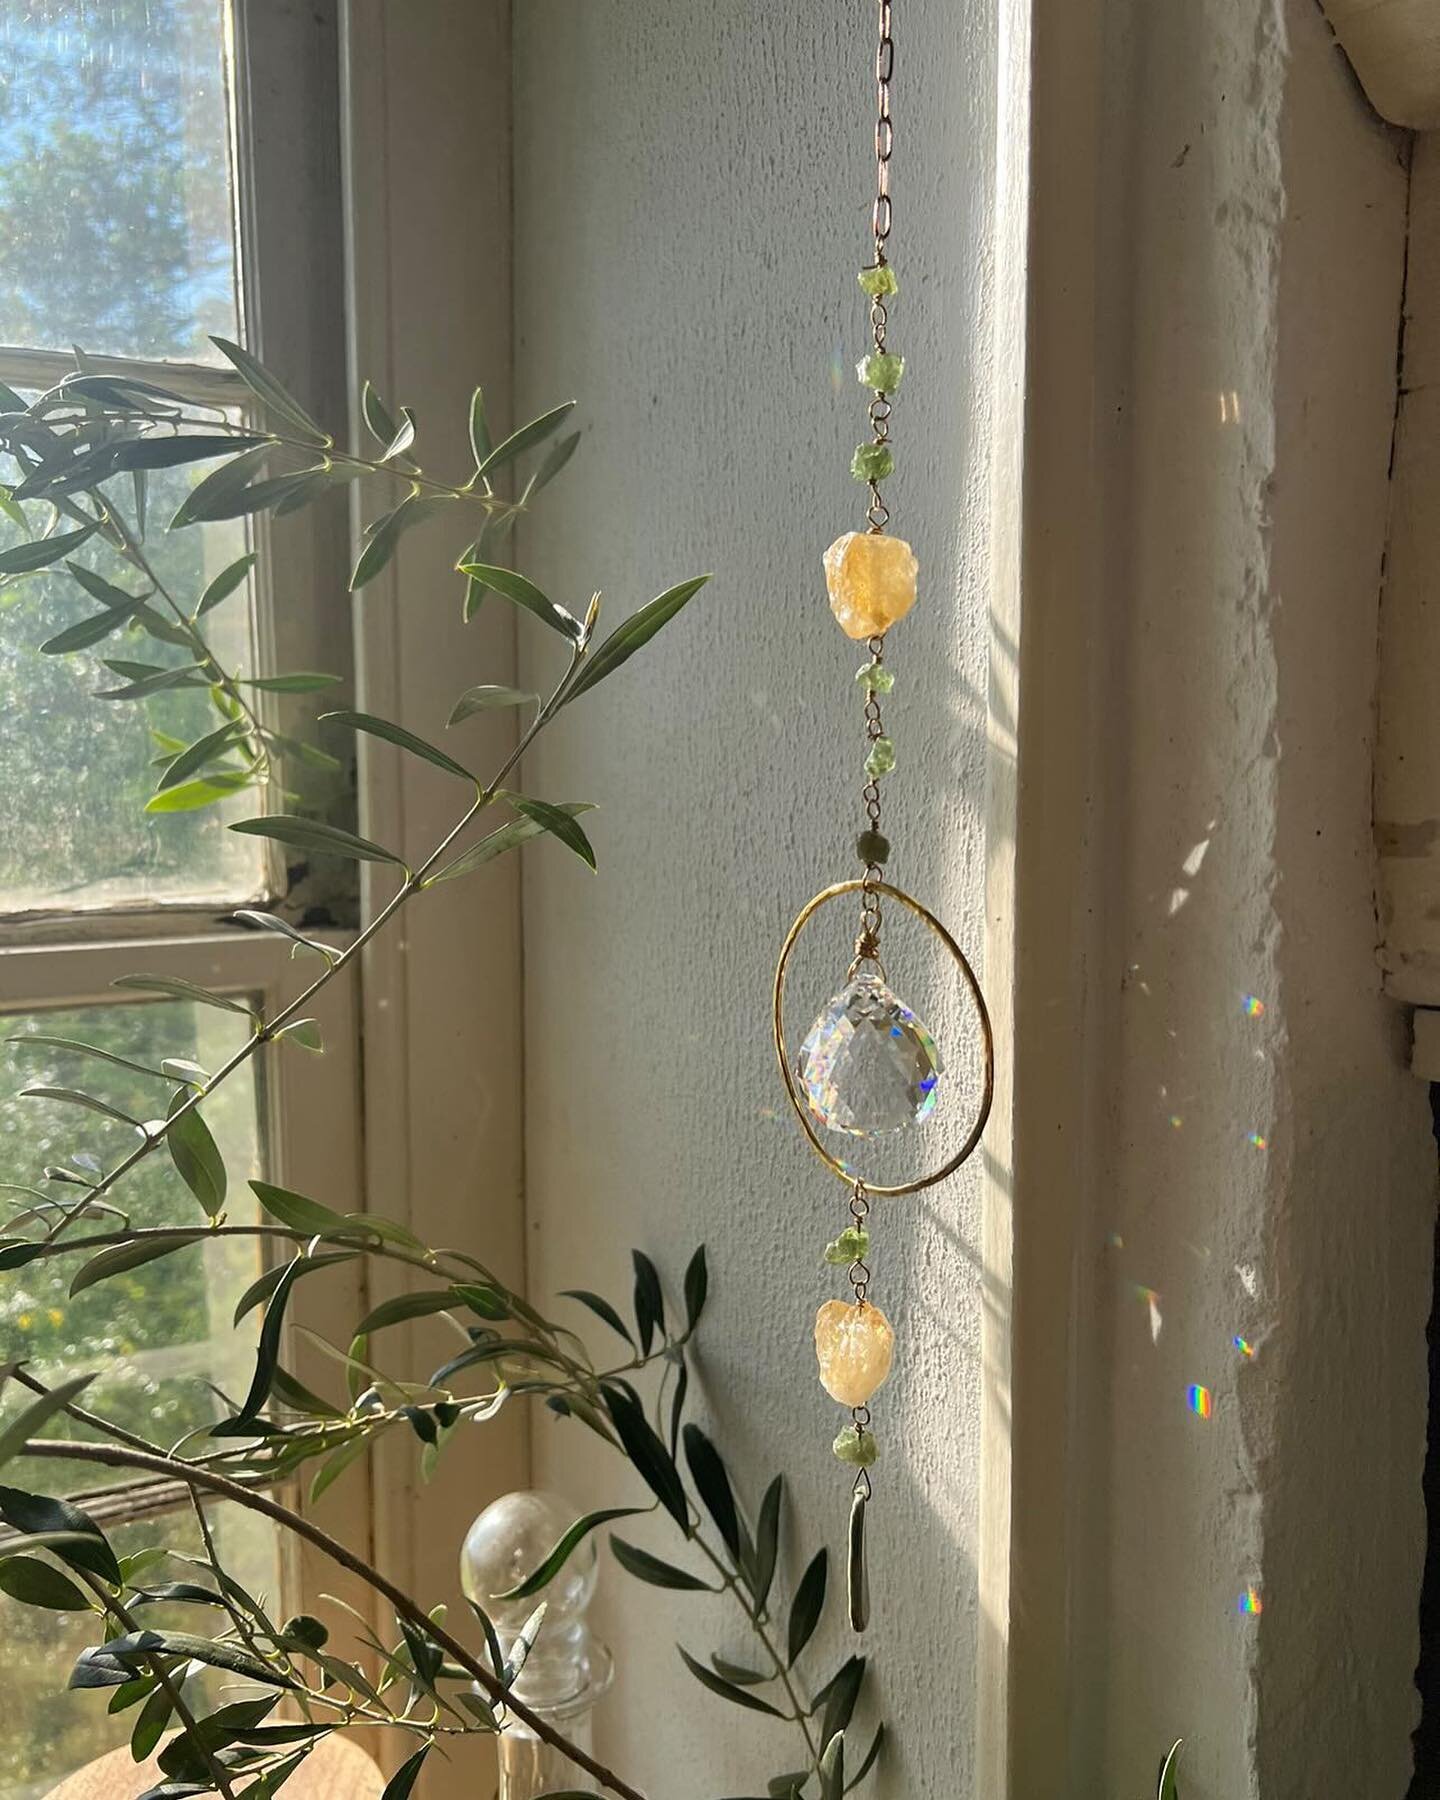 One of our sun catchers in the wild. 💫 

Thank you @elisaraspanti for sharing this photo of your sun catcher in your beautiful space. 😌

If you would like your own magic maker, you can shop sun catchers in person at @berwynfarmersmarket on July 30t